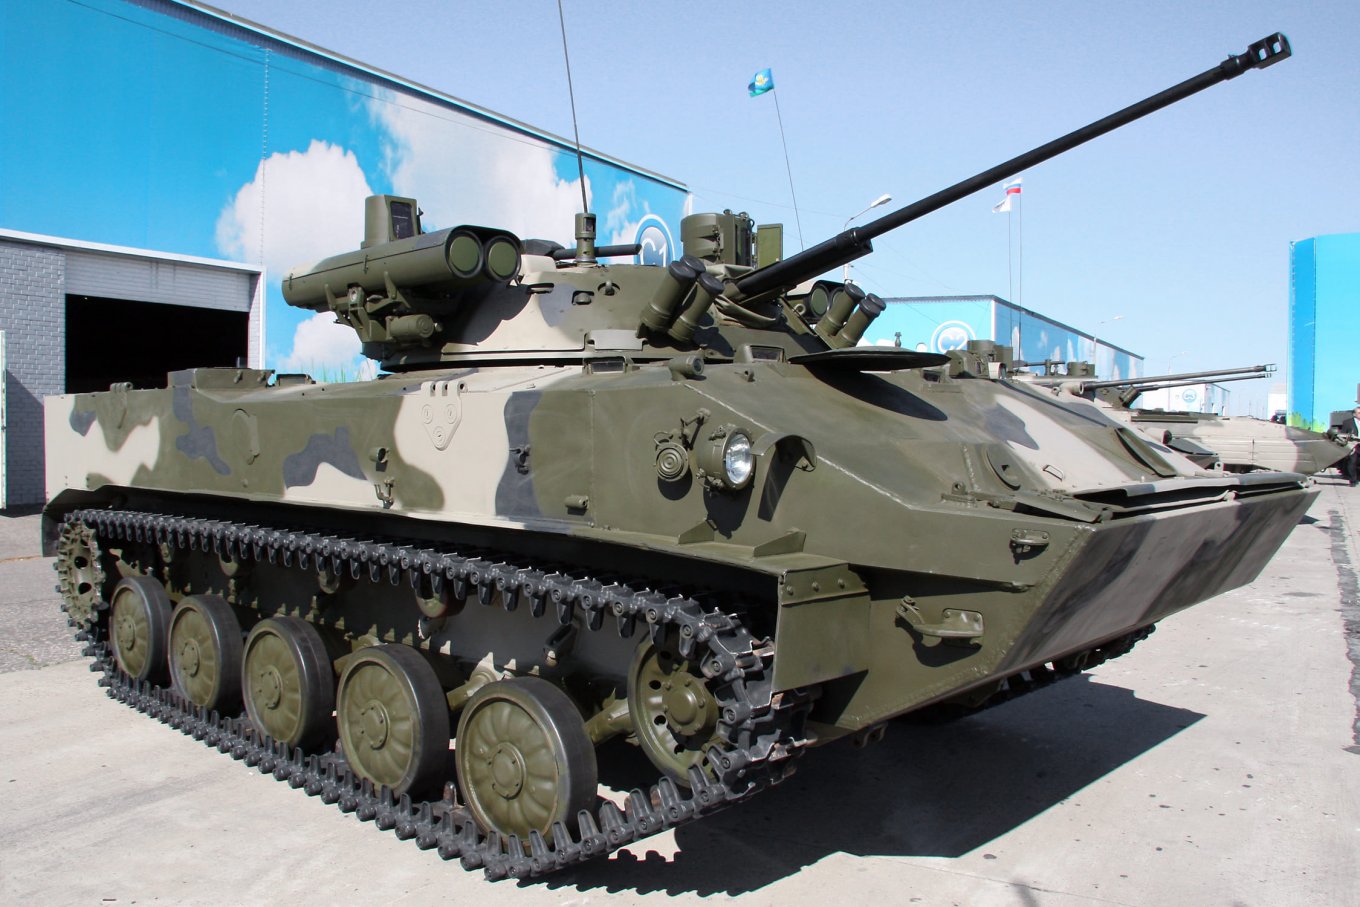 The BMD-3 infantry fighting vehicle Defense Express Newly Reactivated BMD-3 Infantry Fighting Vehicles Hint at Secret russian Stockpiles